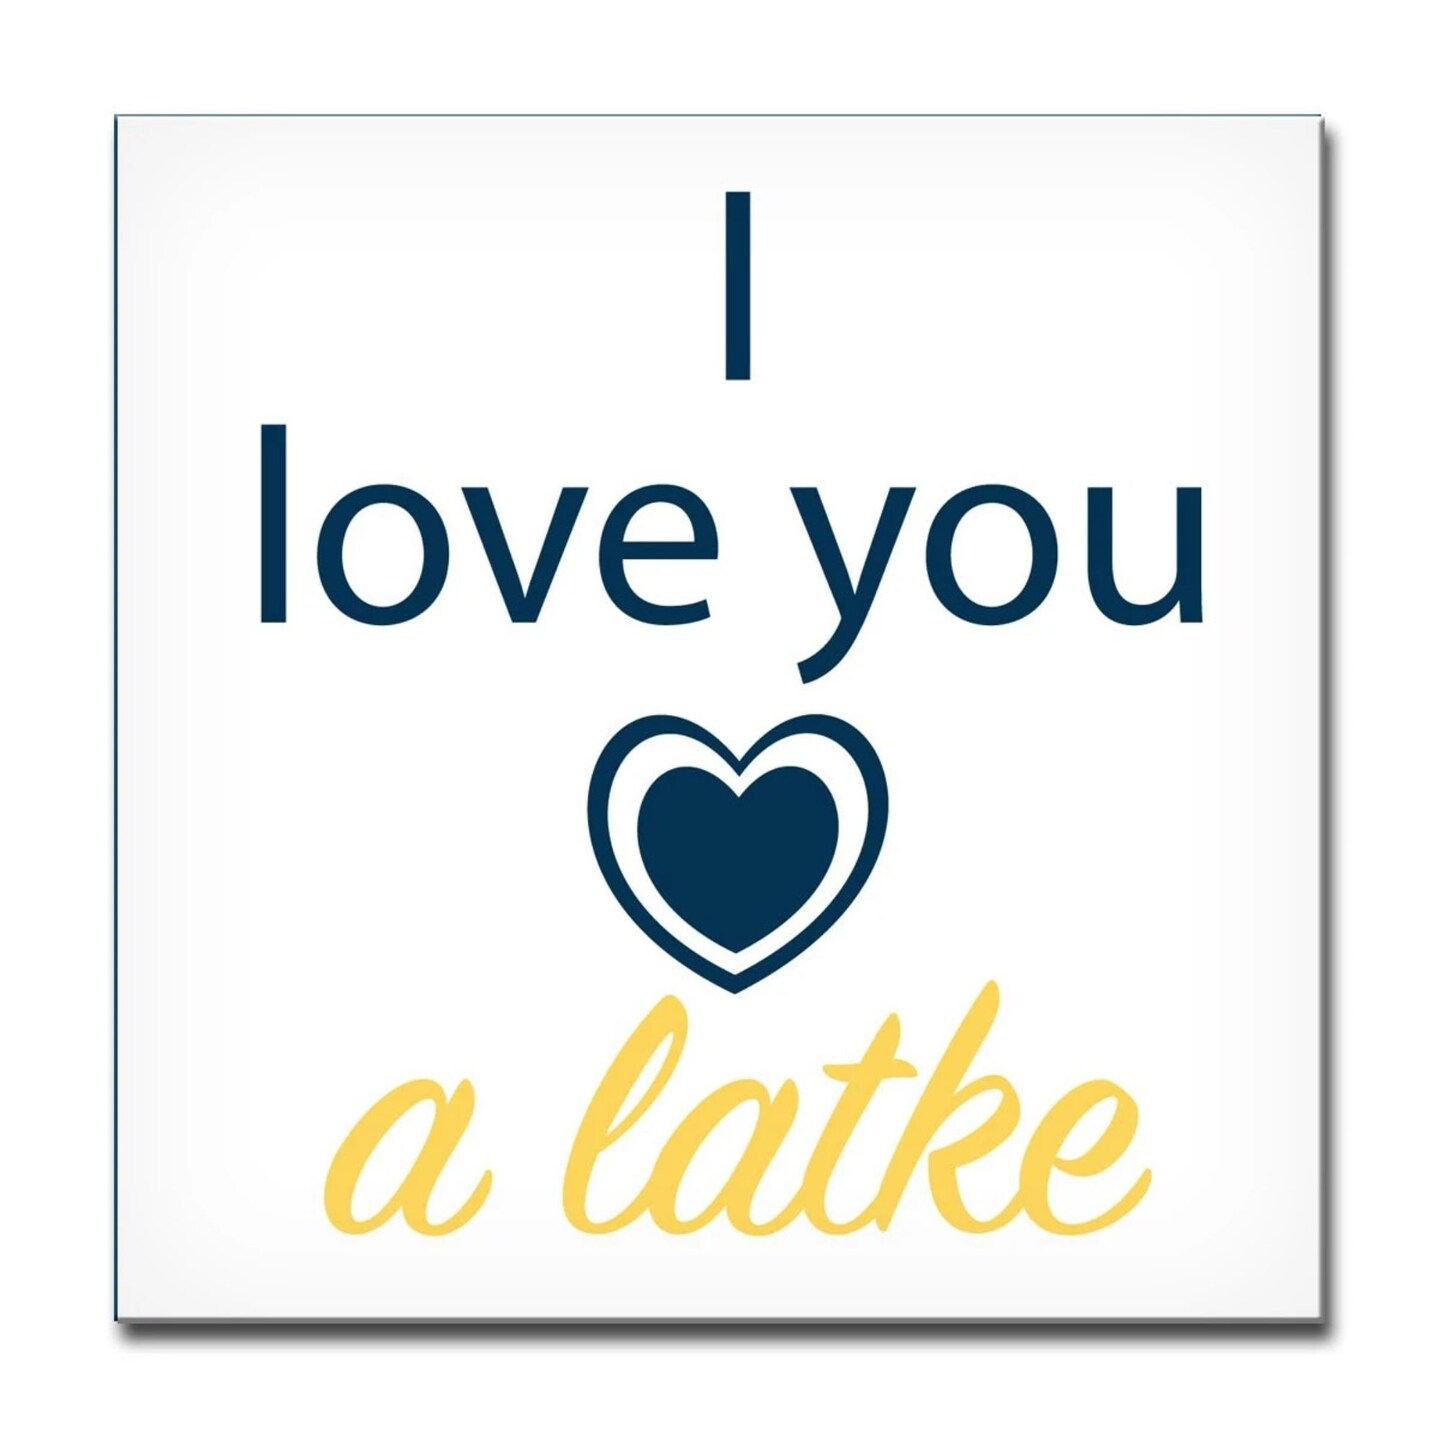 Crafted Creations White and Yellow &#x22;I love you a latke&#x22; Hanukkah Square Cotton Wall Art Decor 12&#x22; x 12&#x22;